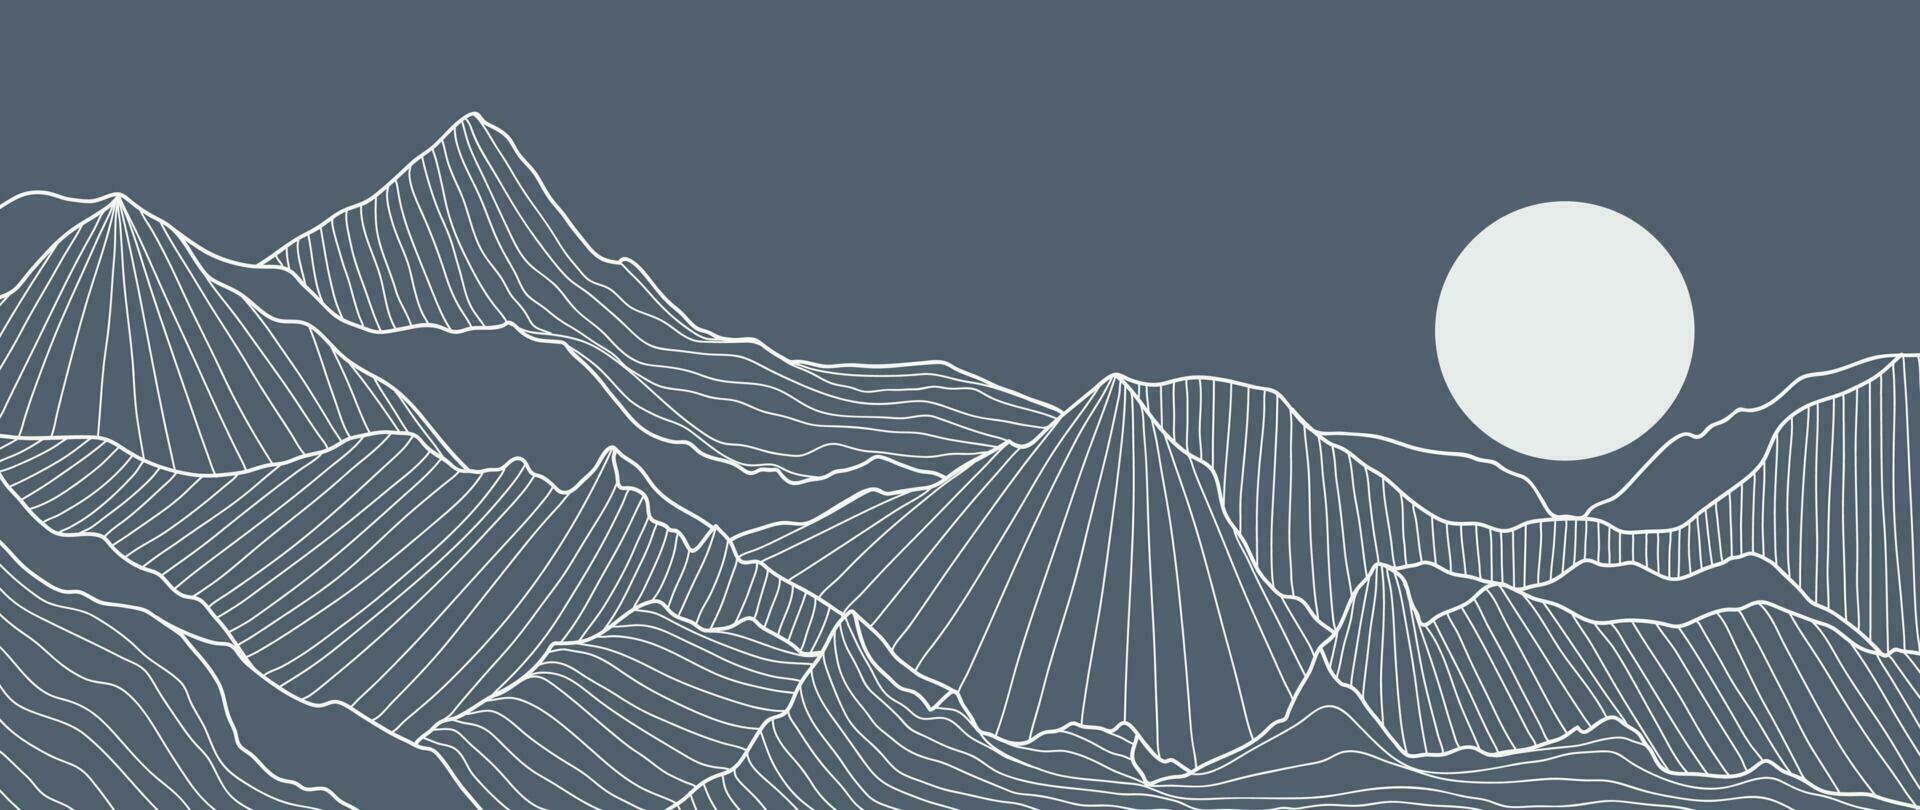 Mountain line art wallpaper. Contour drawing luxury scenic landscape, hills, moon. Panorama view of mountain design illustration for cover, invitation background, packaging design, banner and print. vector